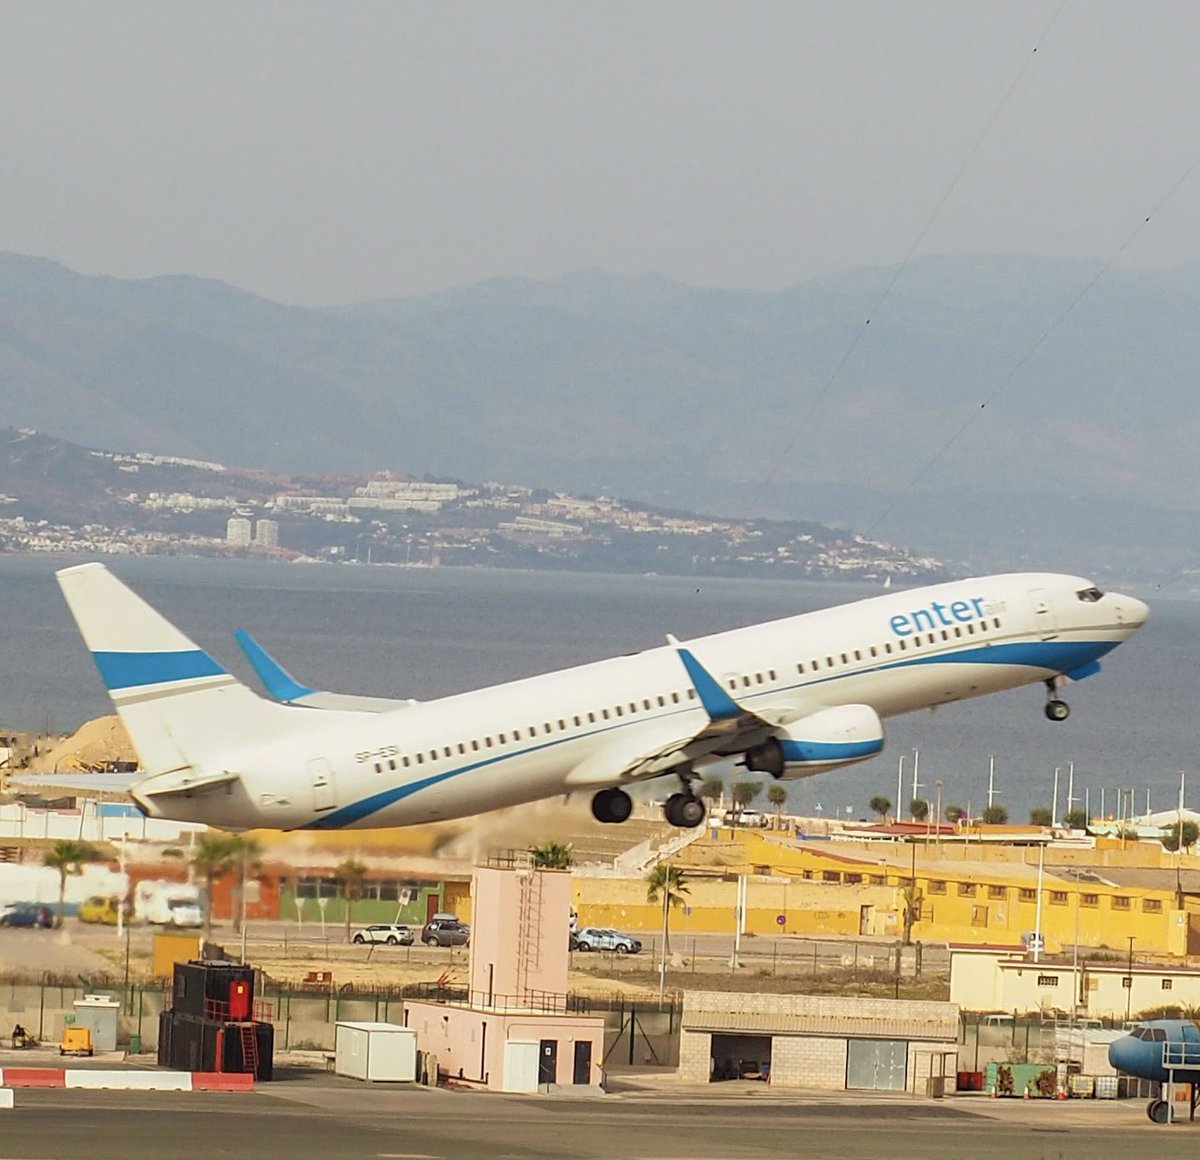 Today’s post features an ex Malev Boeing B737-8Q8 (SP-ESI) now operated by Enter Air on a special charter taking off from Gibraltar Airport back to Warsaw Chopin Airport.